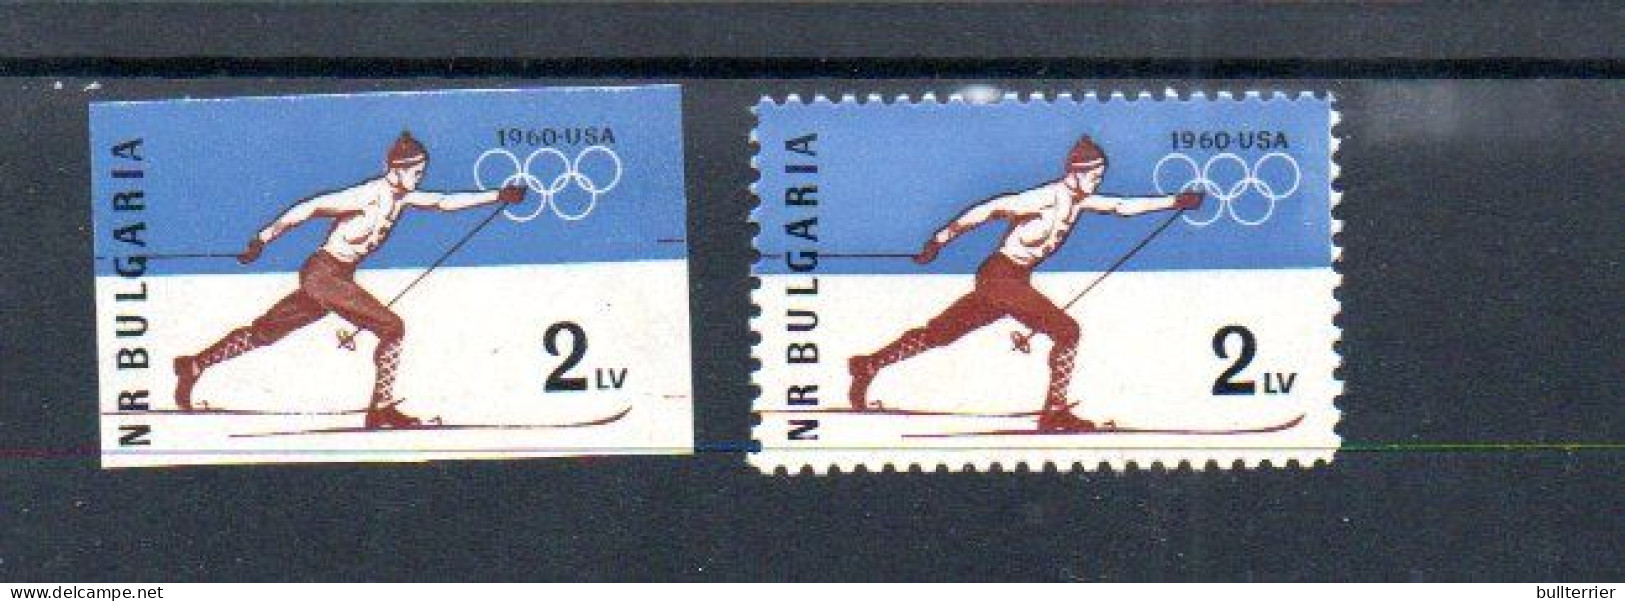 BULGARIA - 1960 - WINTER OLYMPICS PERF & IMPERF  MINT NEVER HINGED - Neufs